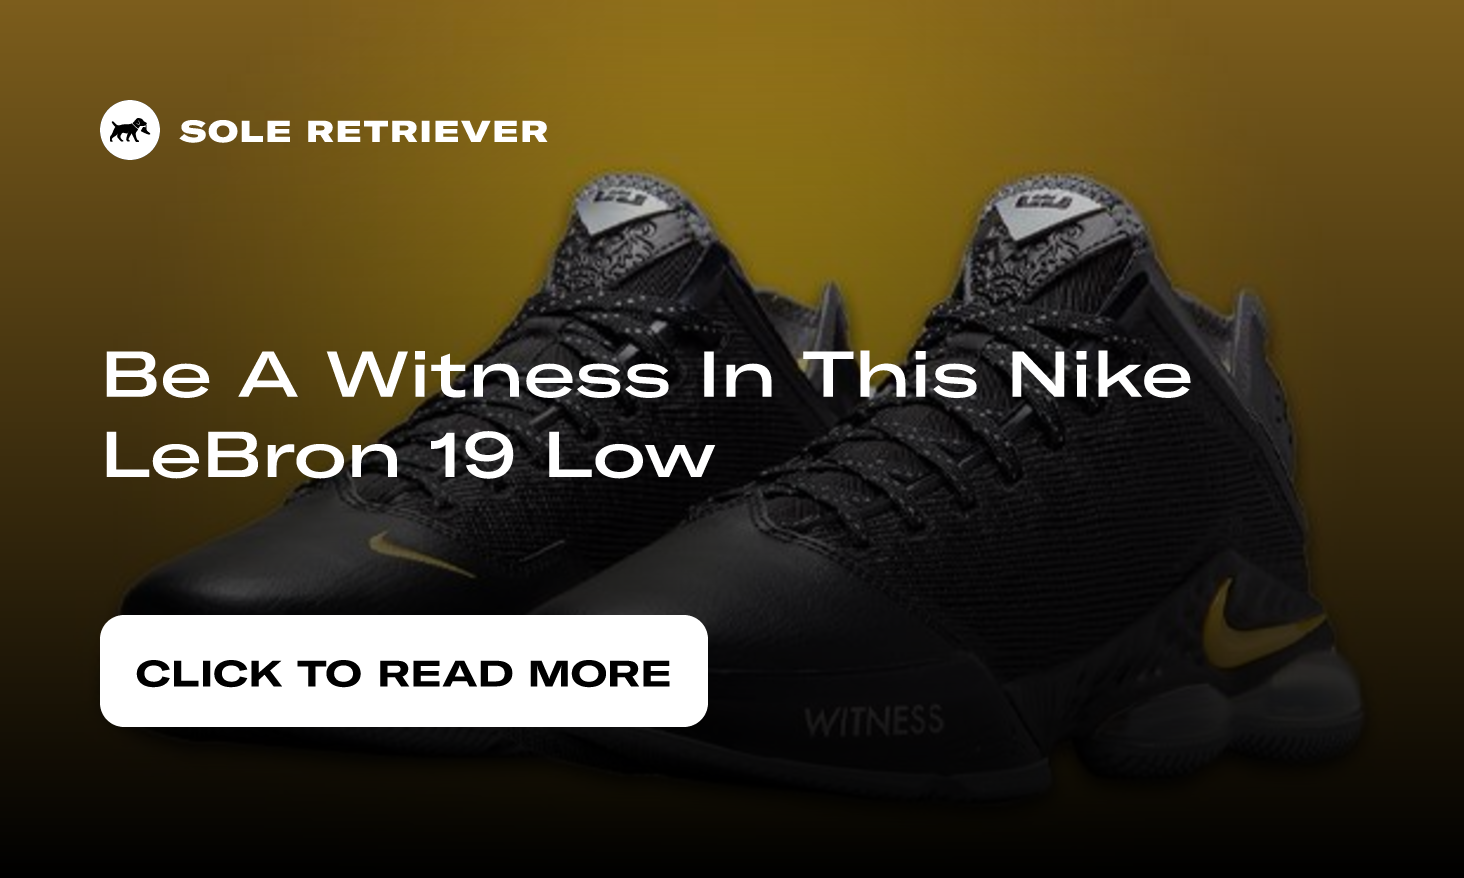 Be A Witness In This Nike LeBron 19 Low